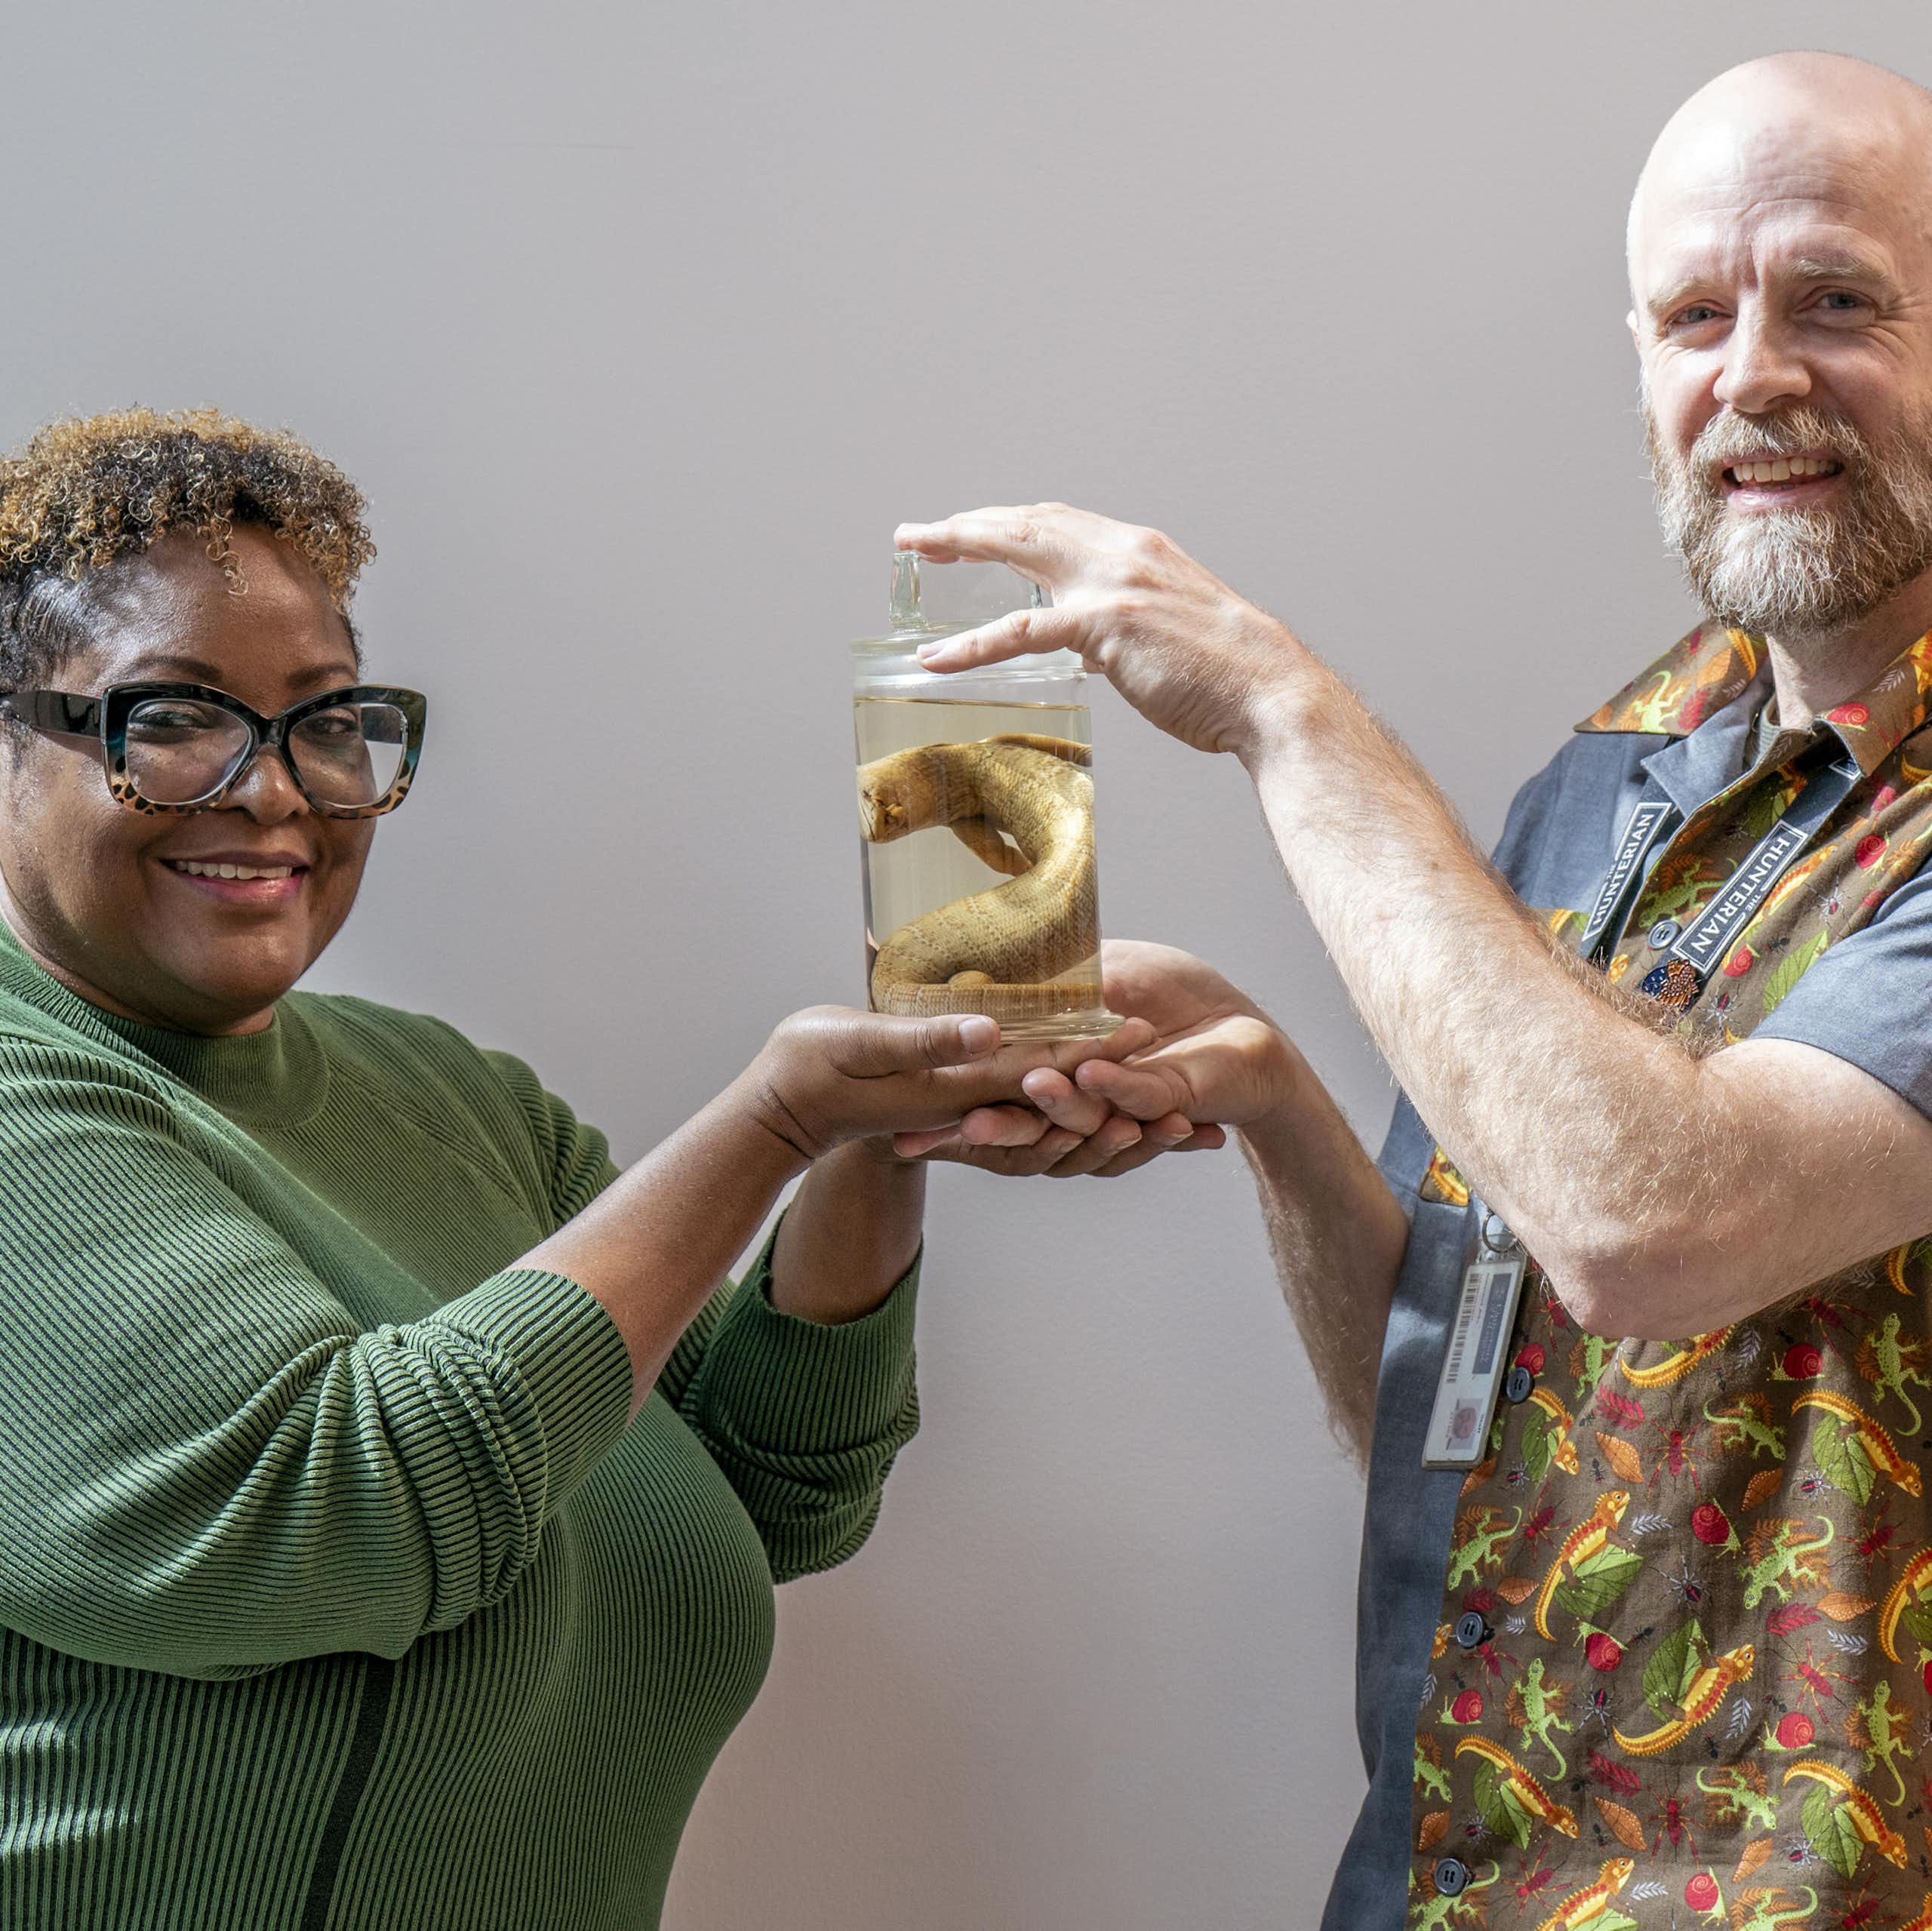 A man and woman hold up a preserved lizard in a jar